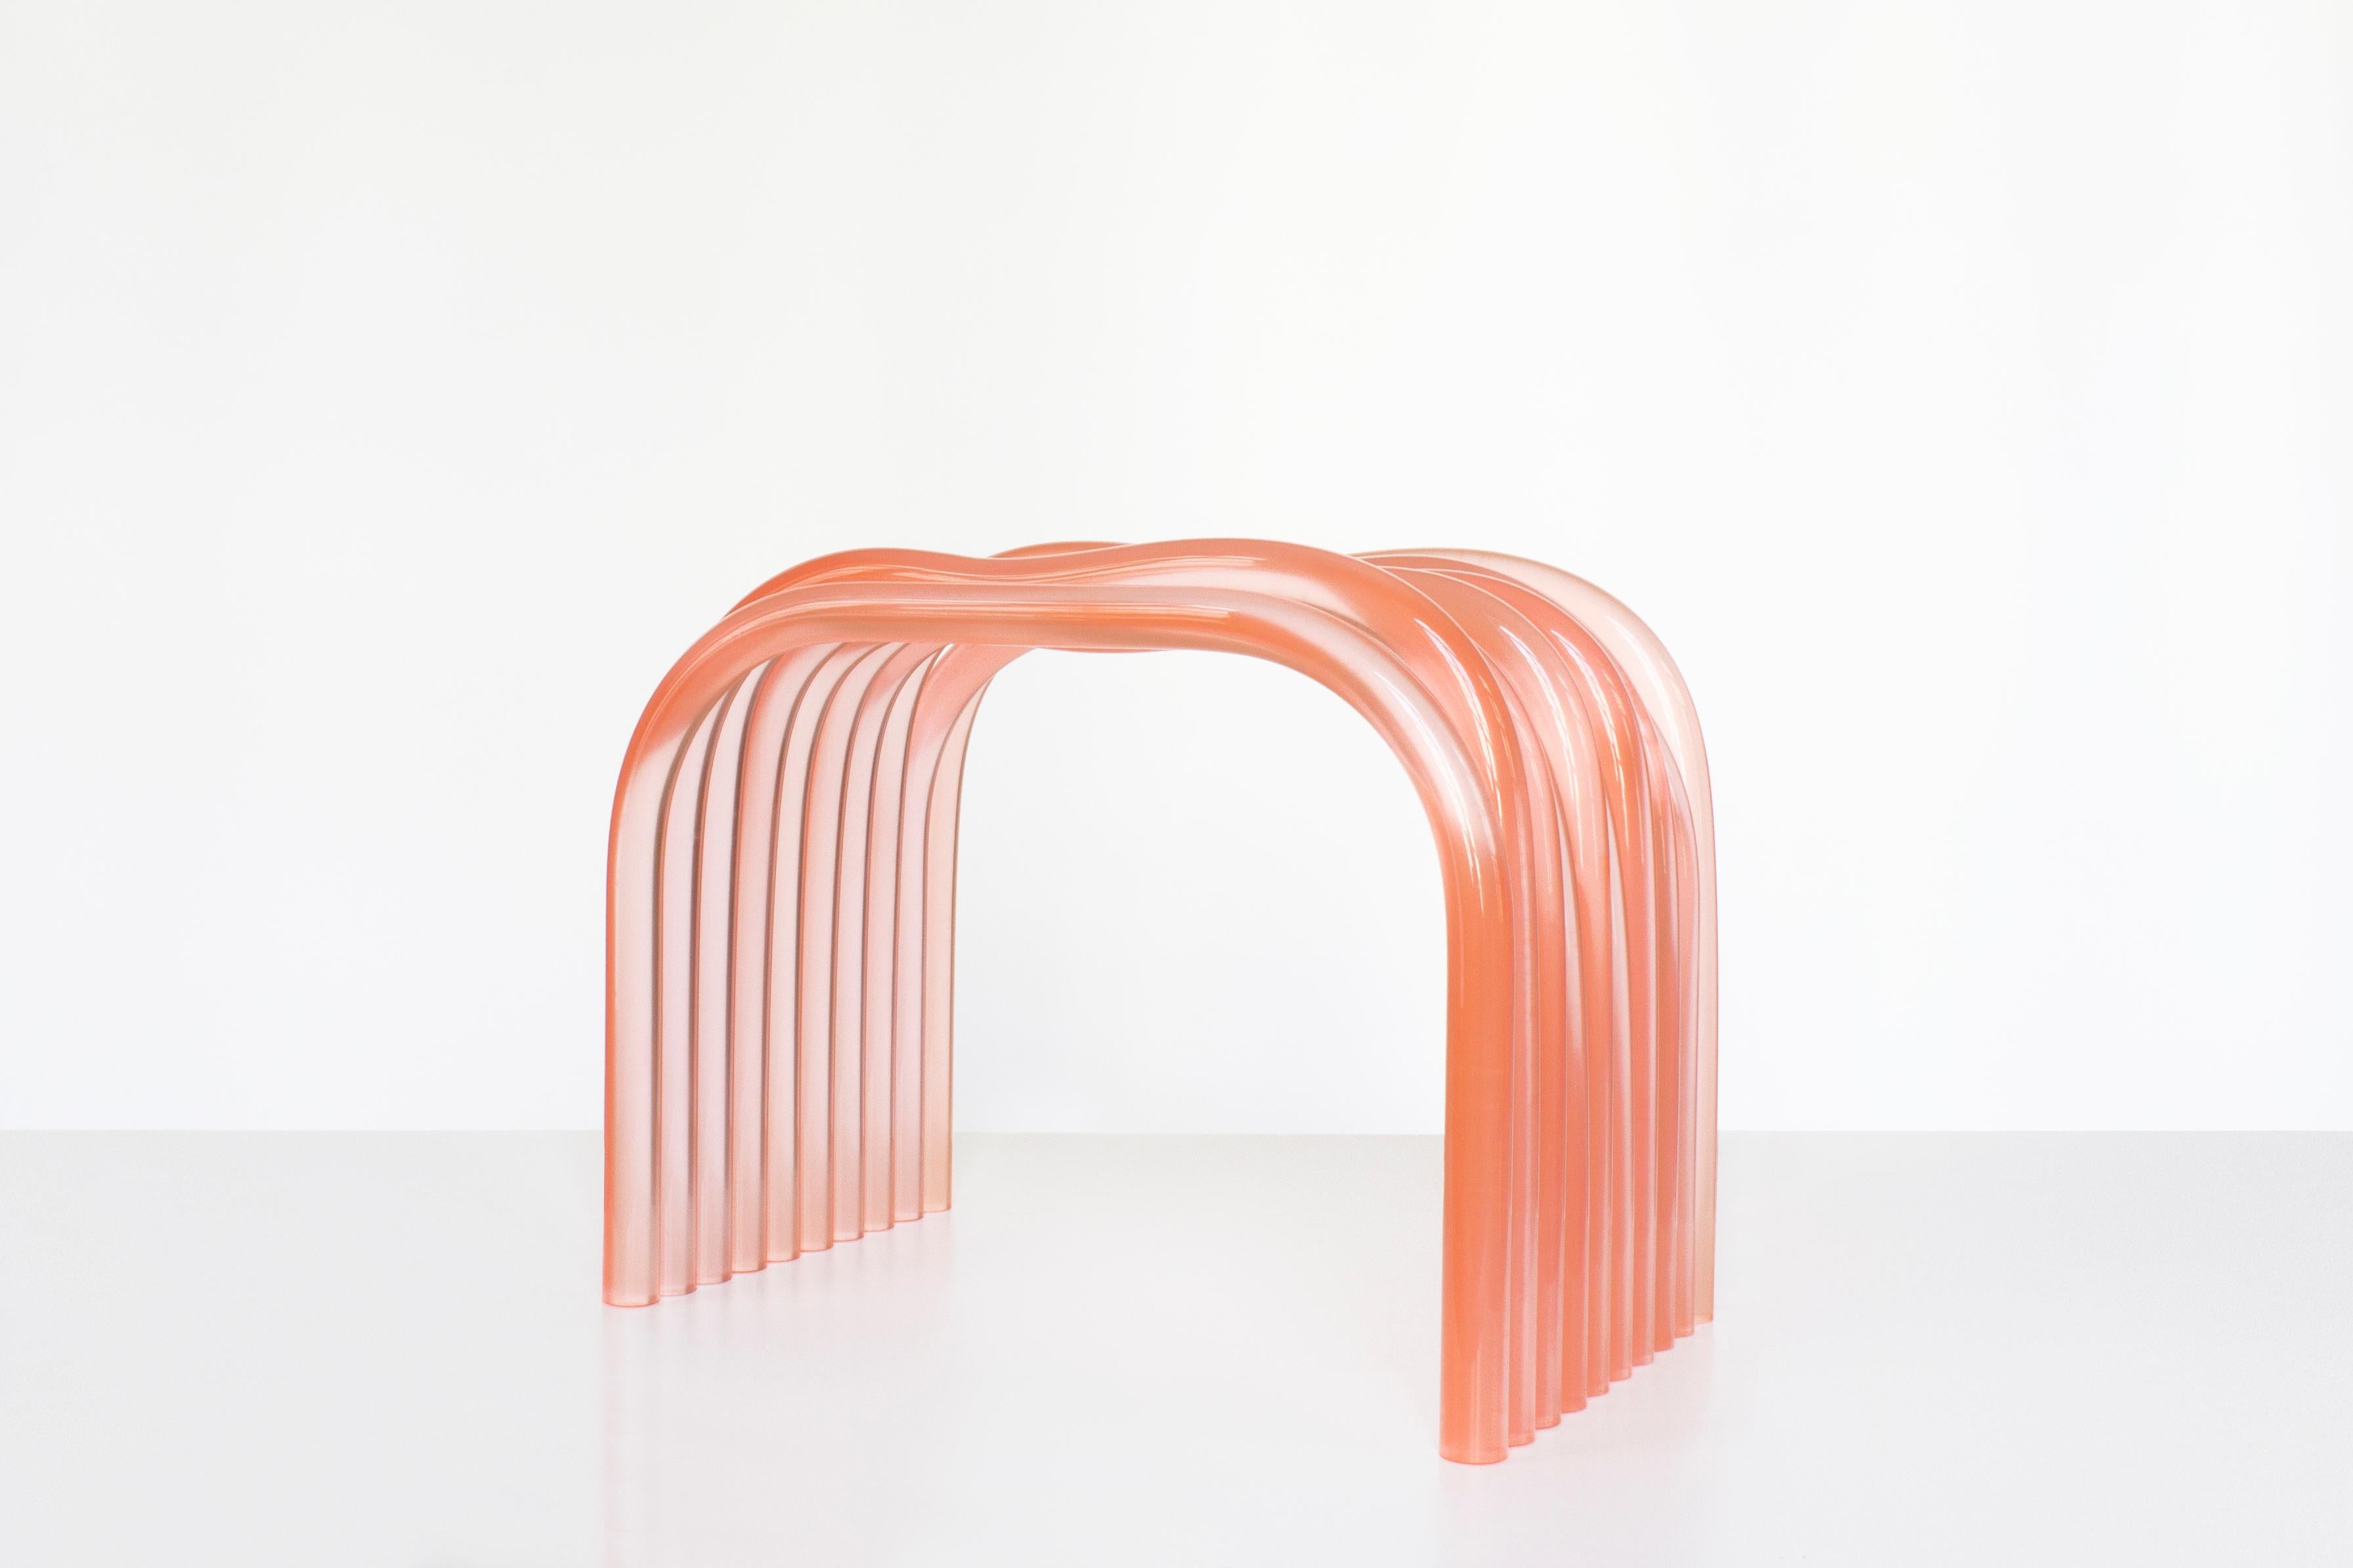 The Stool is the central piece of the Boudins Collection, a series of handcrafted functional objects that surprise and stand out by their sculptural shapes and transparent colorful palette. The Boudins pieces are iconic, yet functional and easily